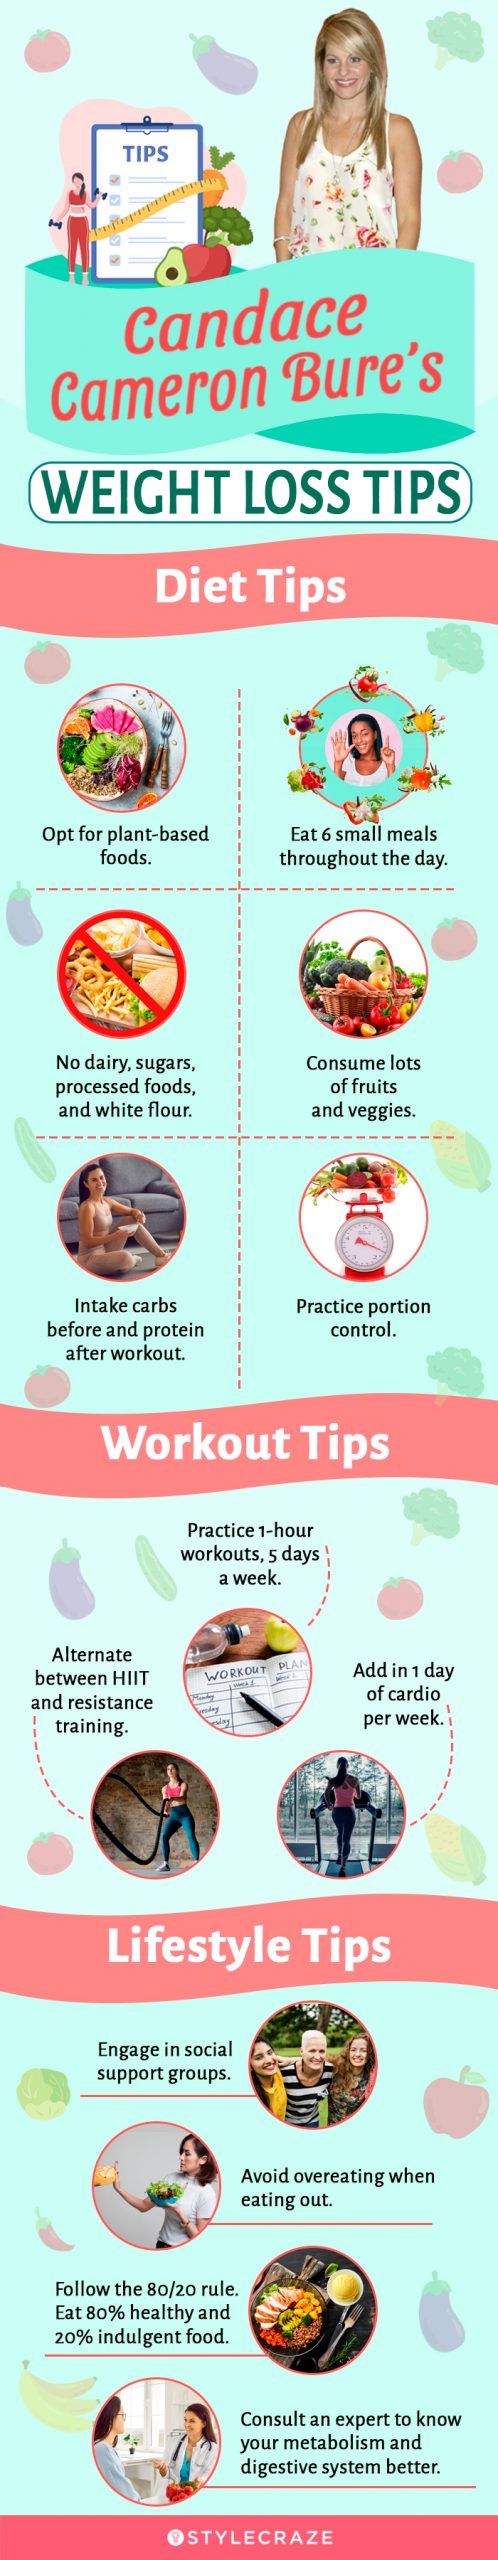 candace cameron bure’s weight loss tips [infographic]